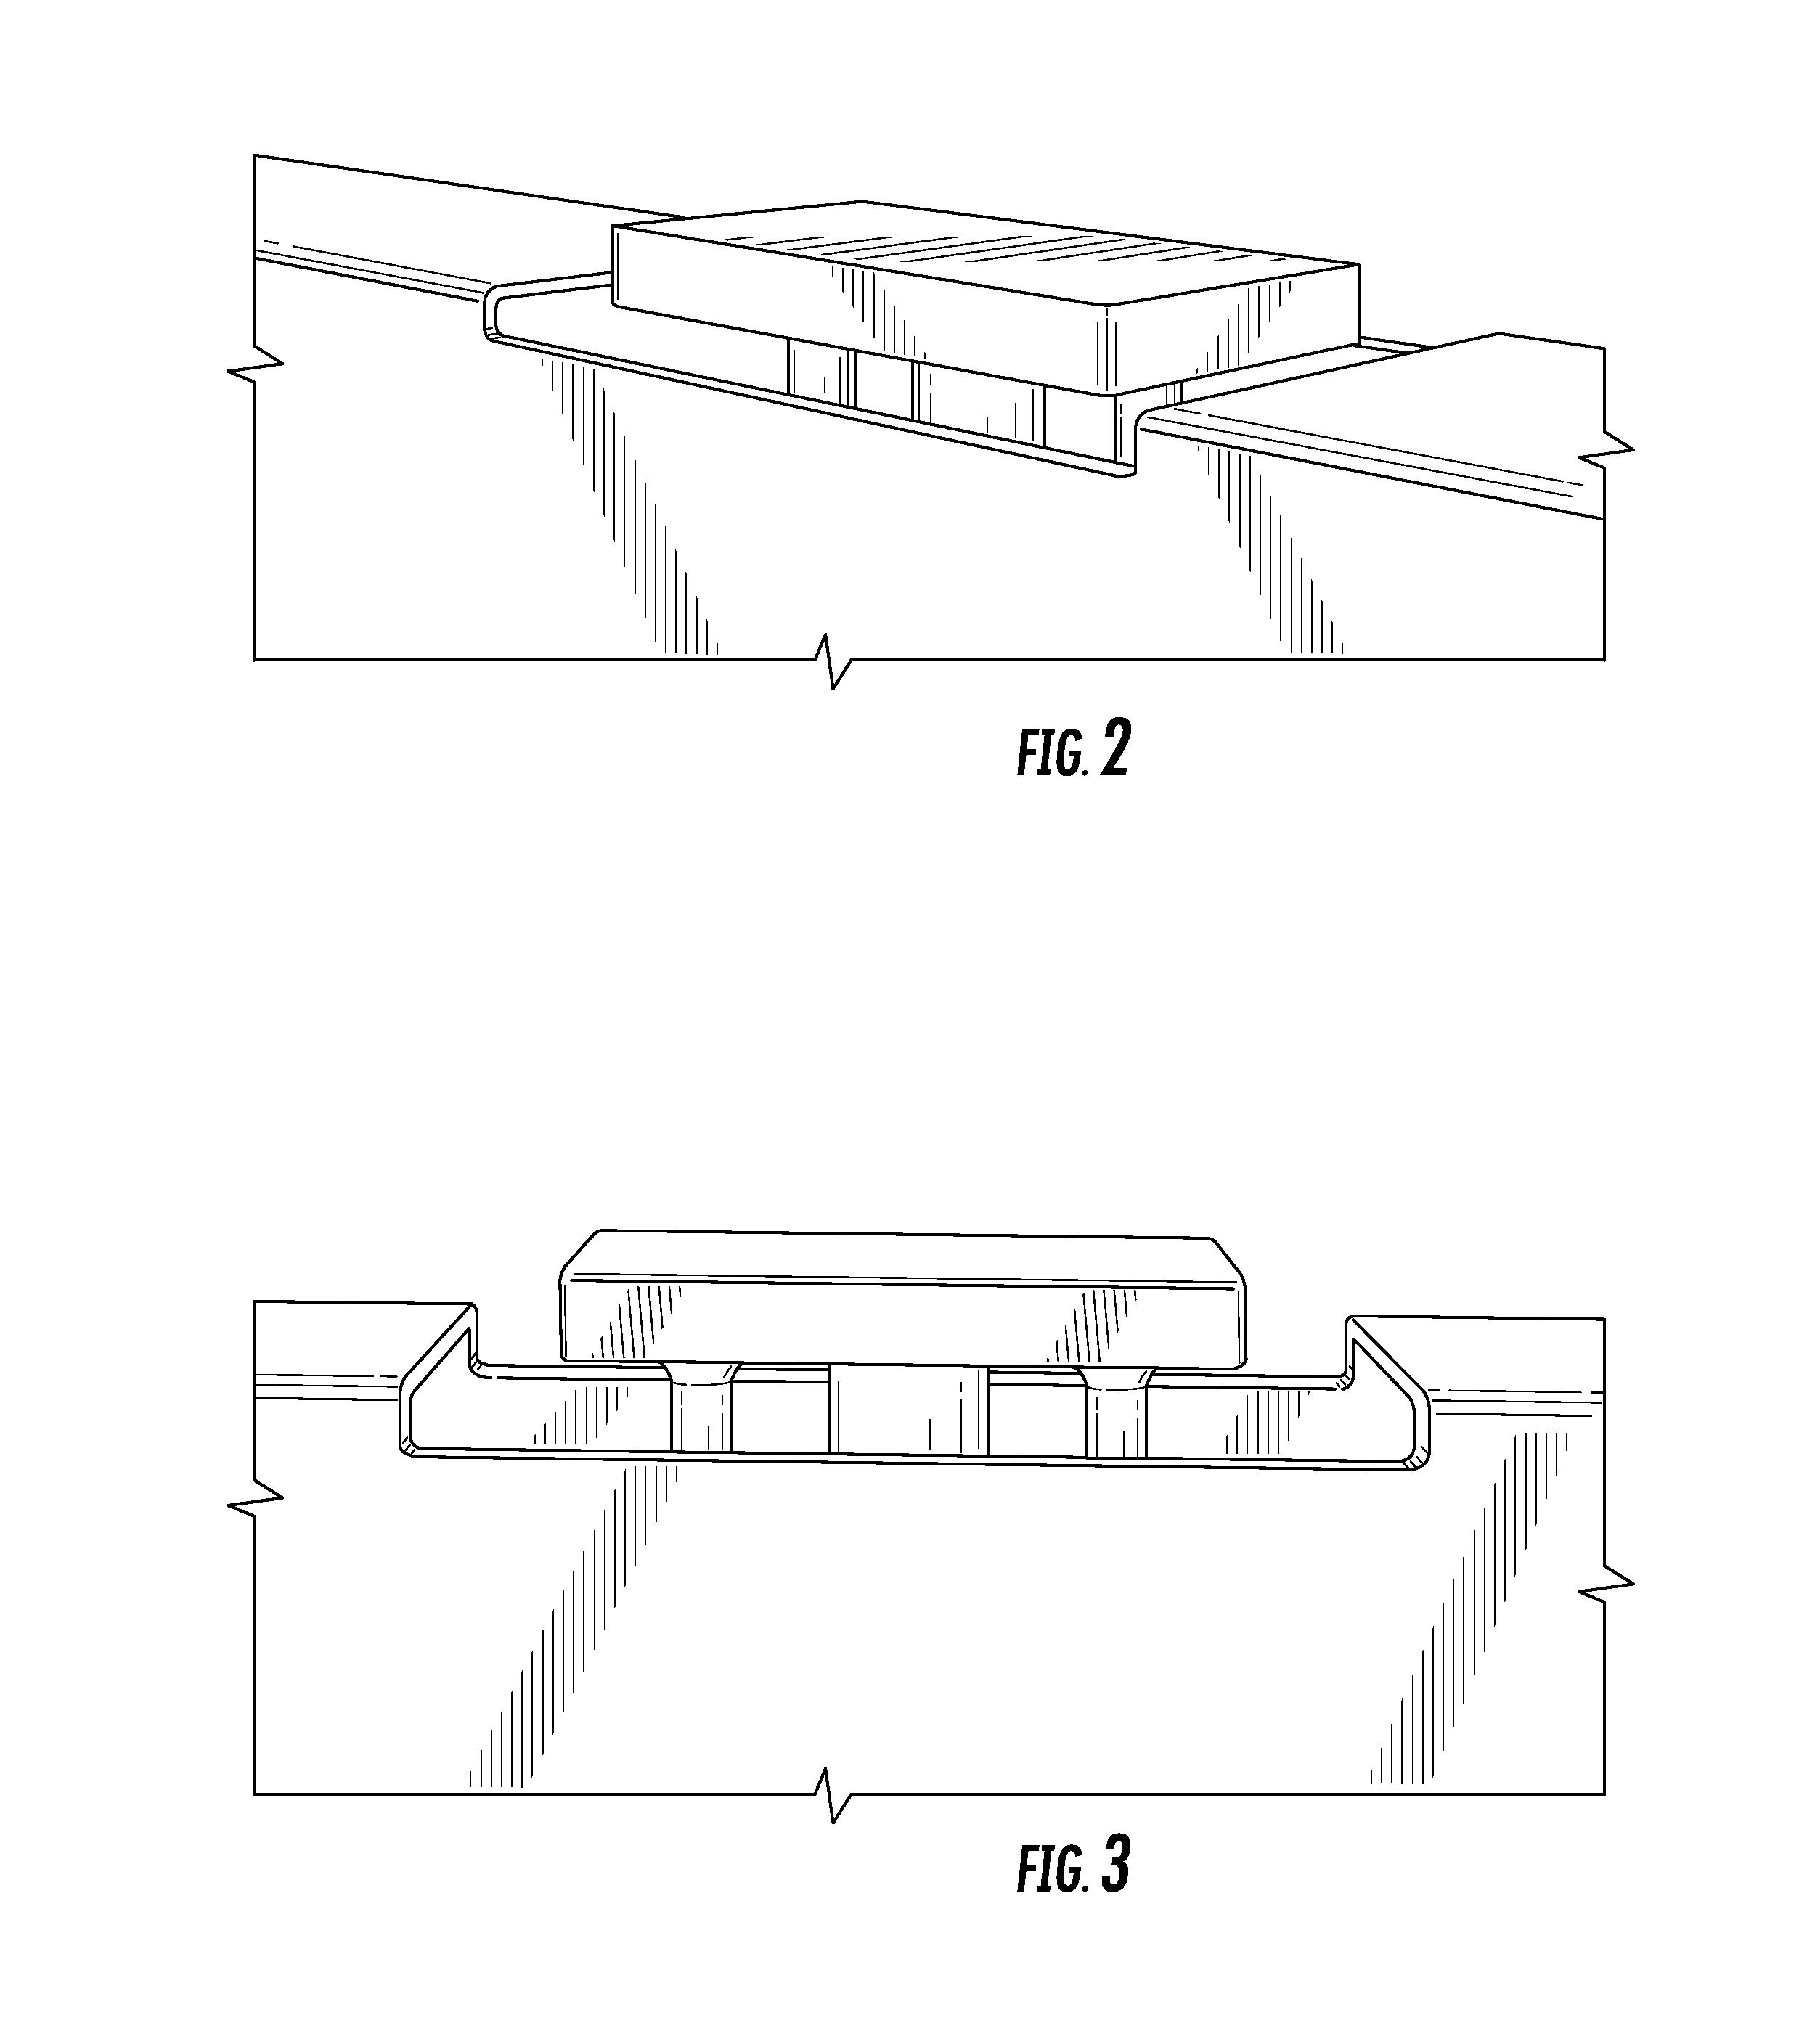 Pallet transportation assembly and processes of transporting pallets using the same